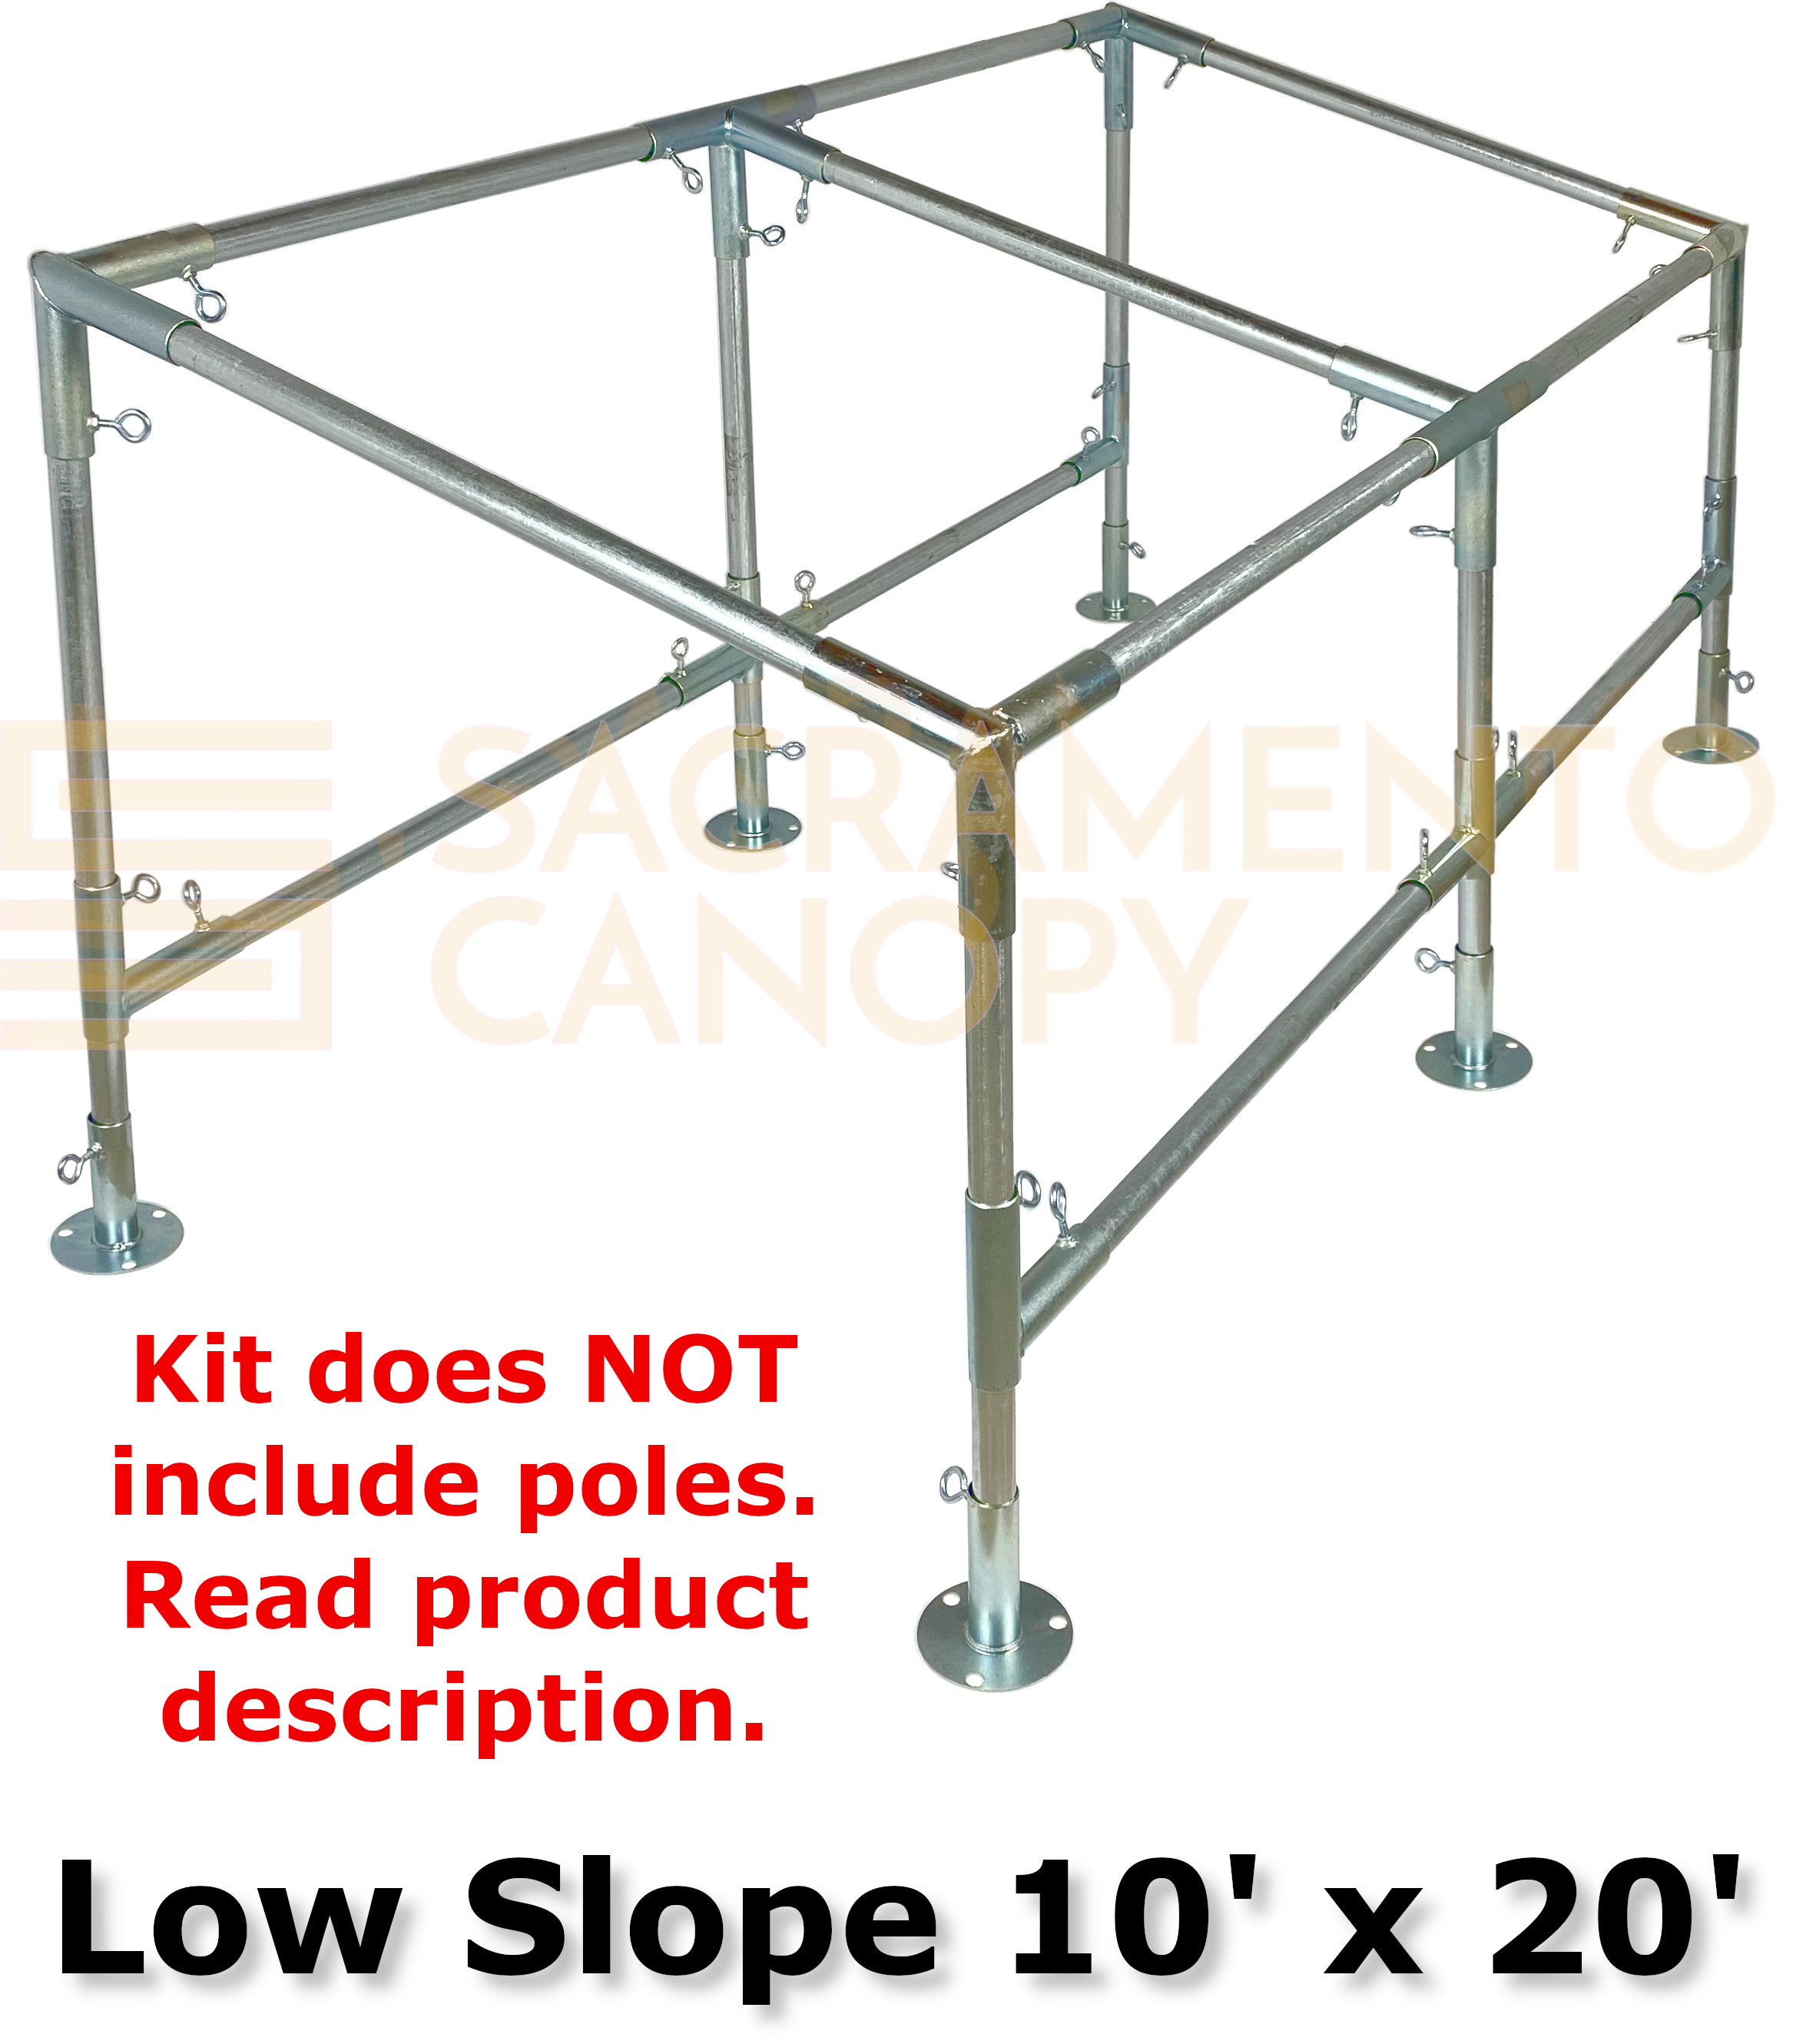 Slope Roof Canopy Fittings Kits (10' Wide) DIY Greenhouse, RV & Boat Carport, Shelter, Shade Structure, Vendor Booth, Tent, Steel Frame EMT Connector Parts, 1" - image 5 of 22